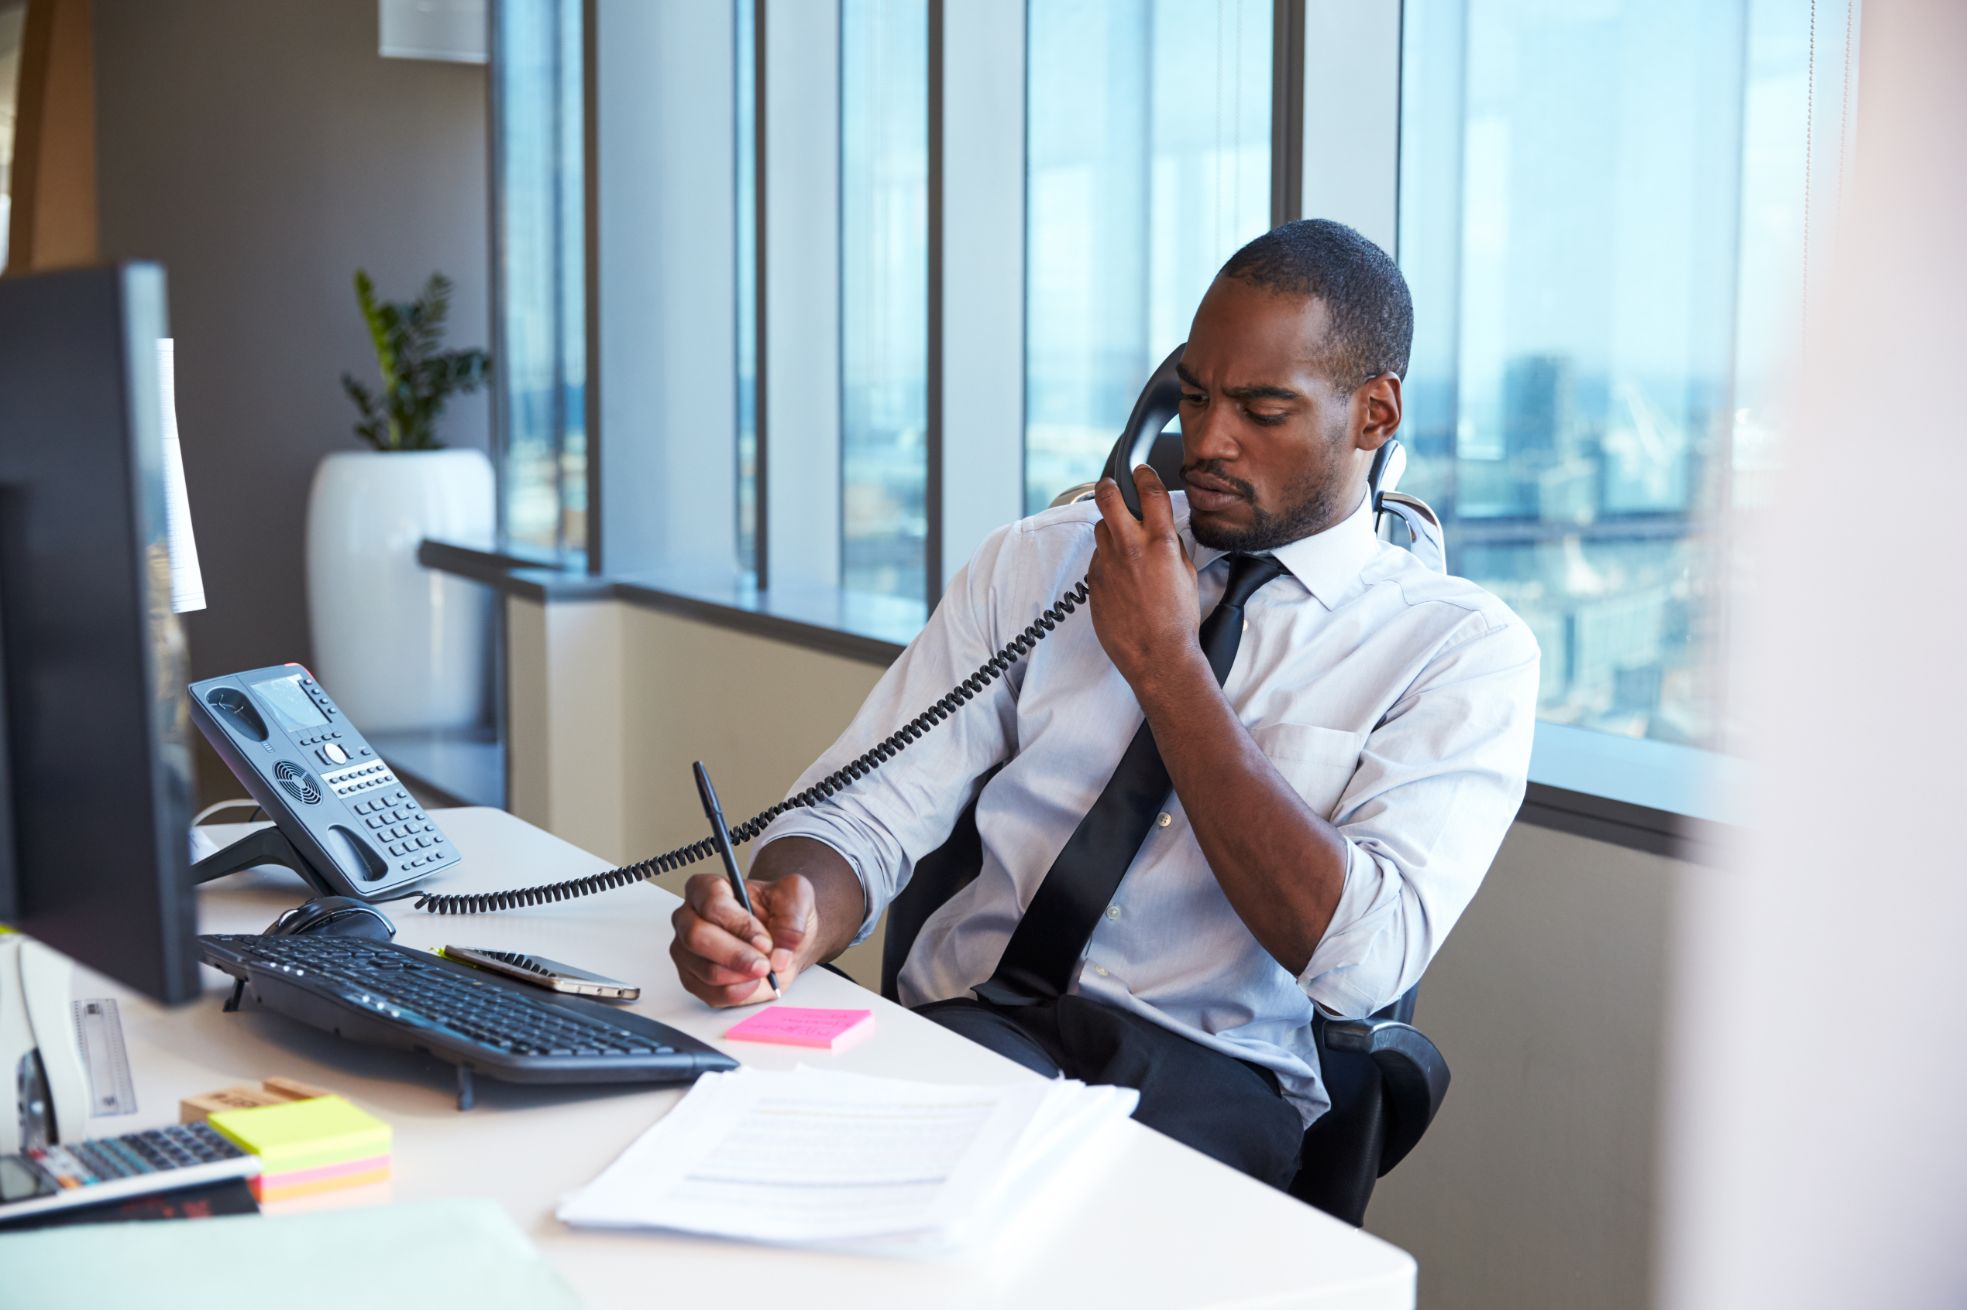 Business man talking on desk phone while writing notes 